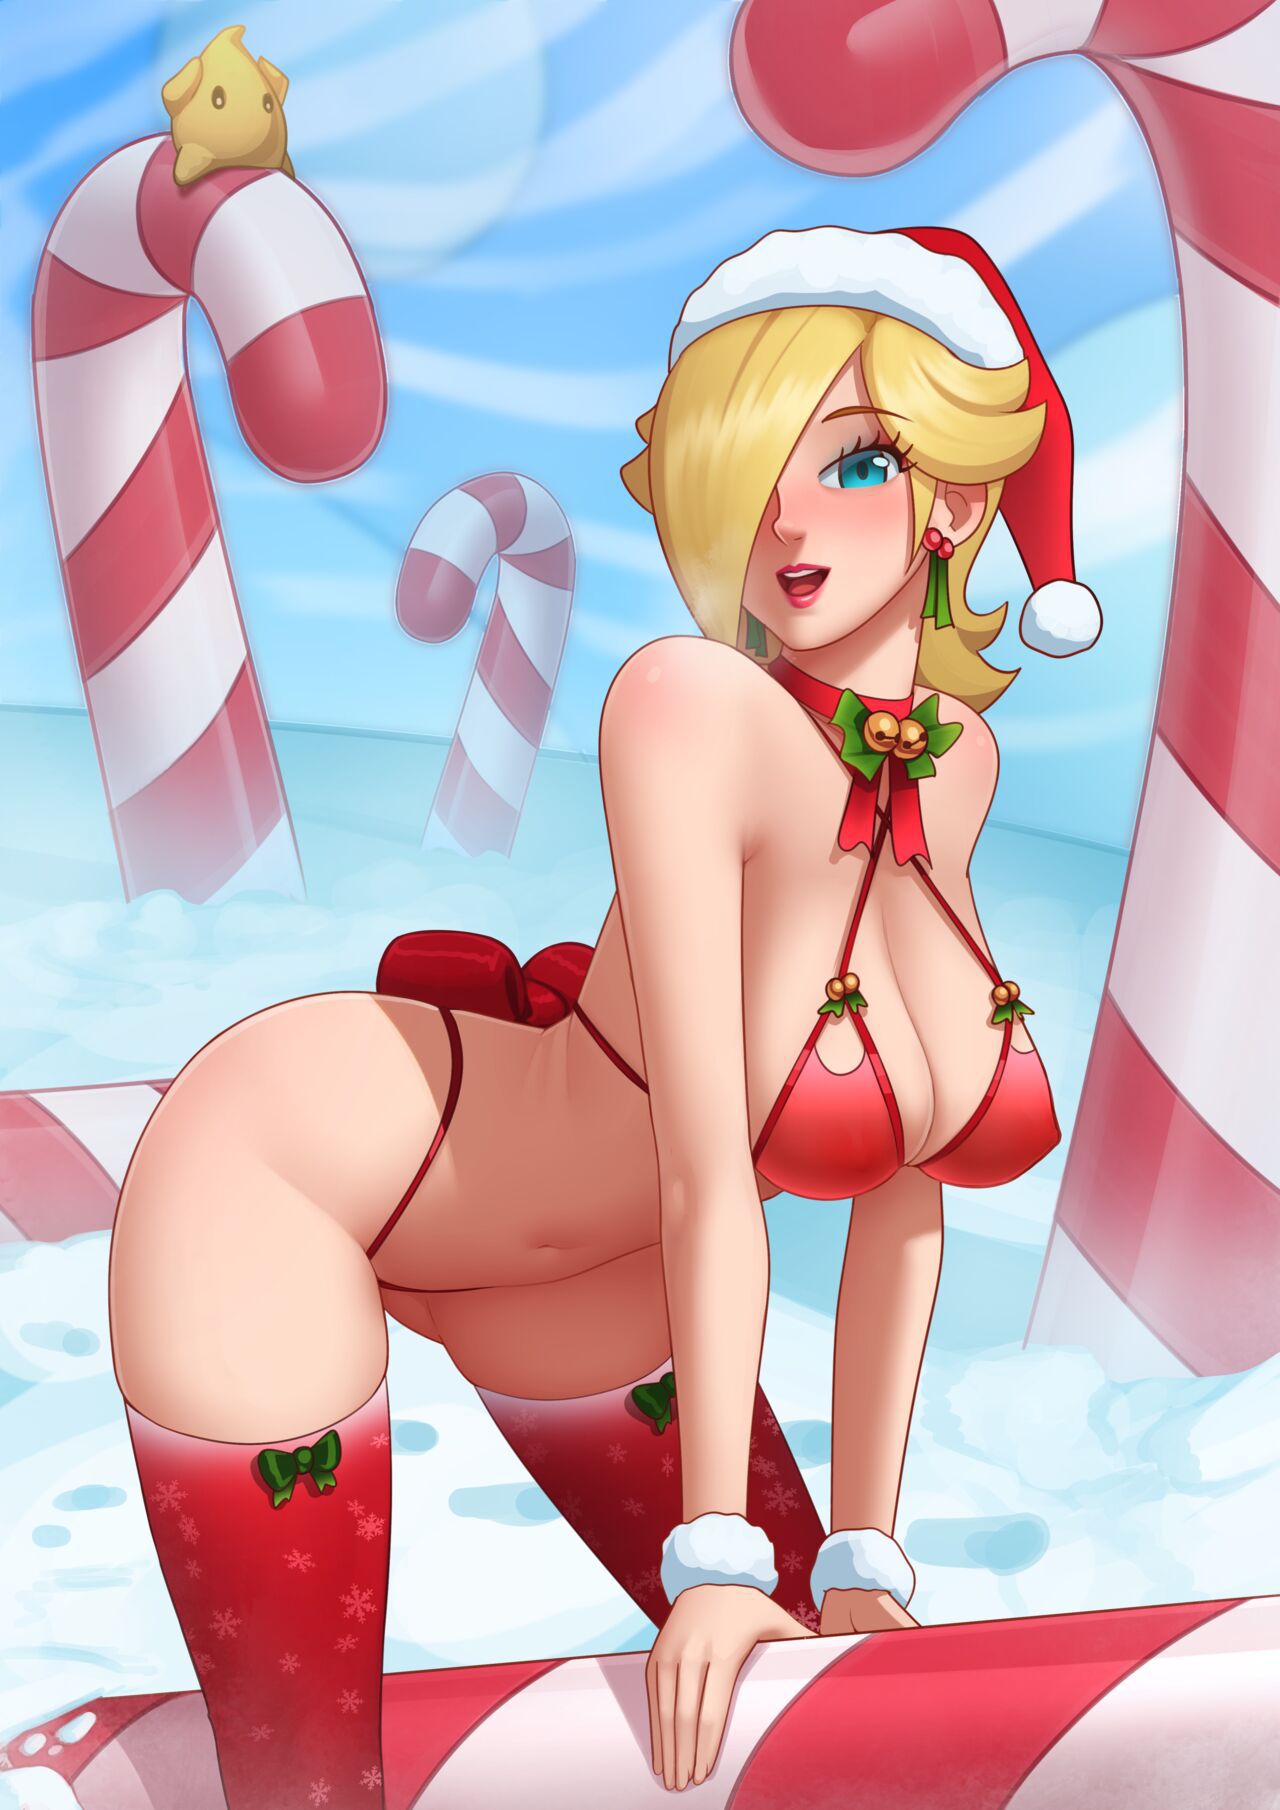 [Deilan12] Candy Canes Appeared 3